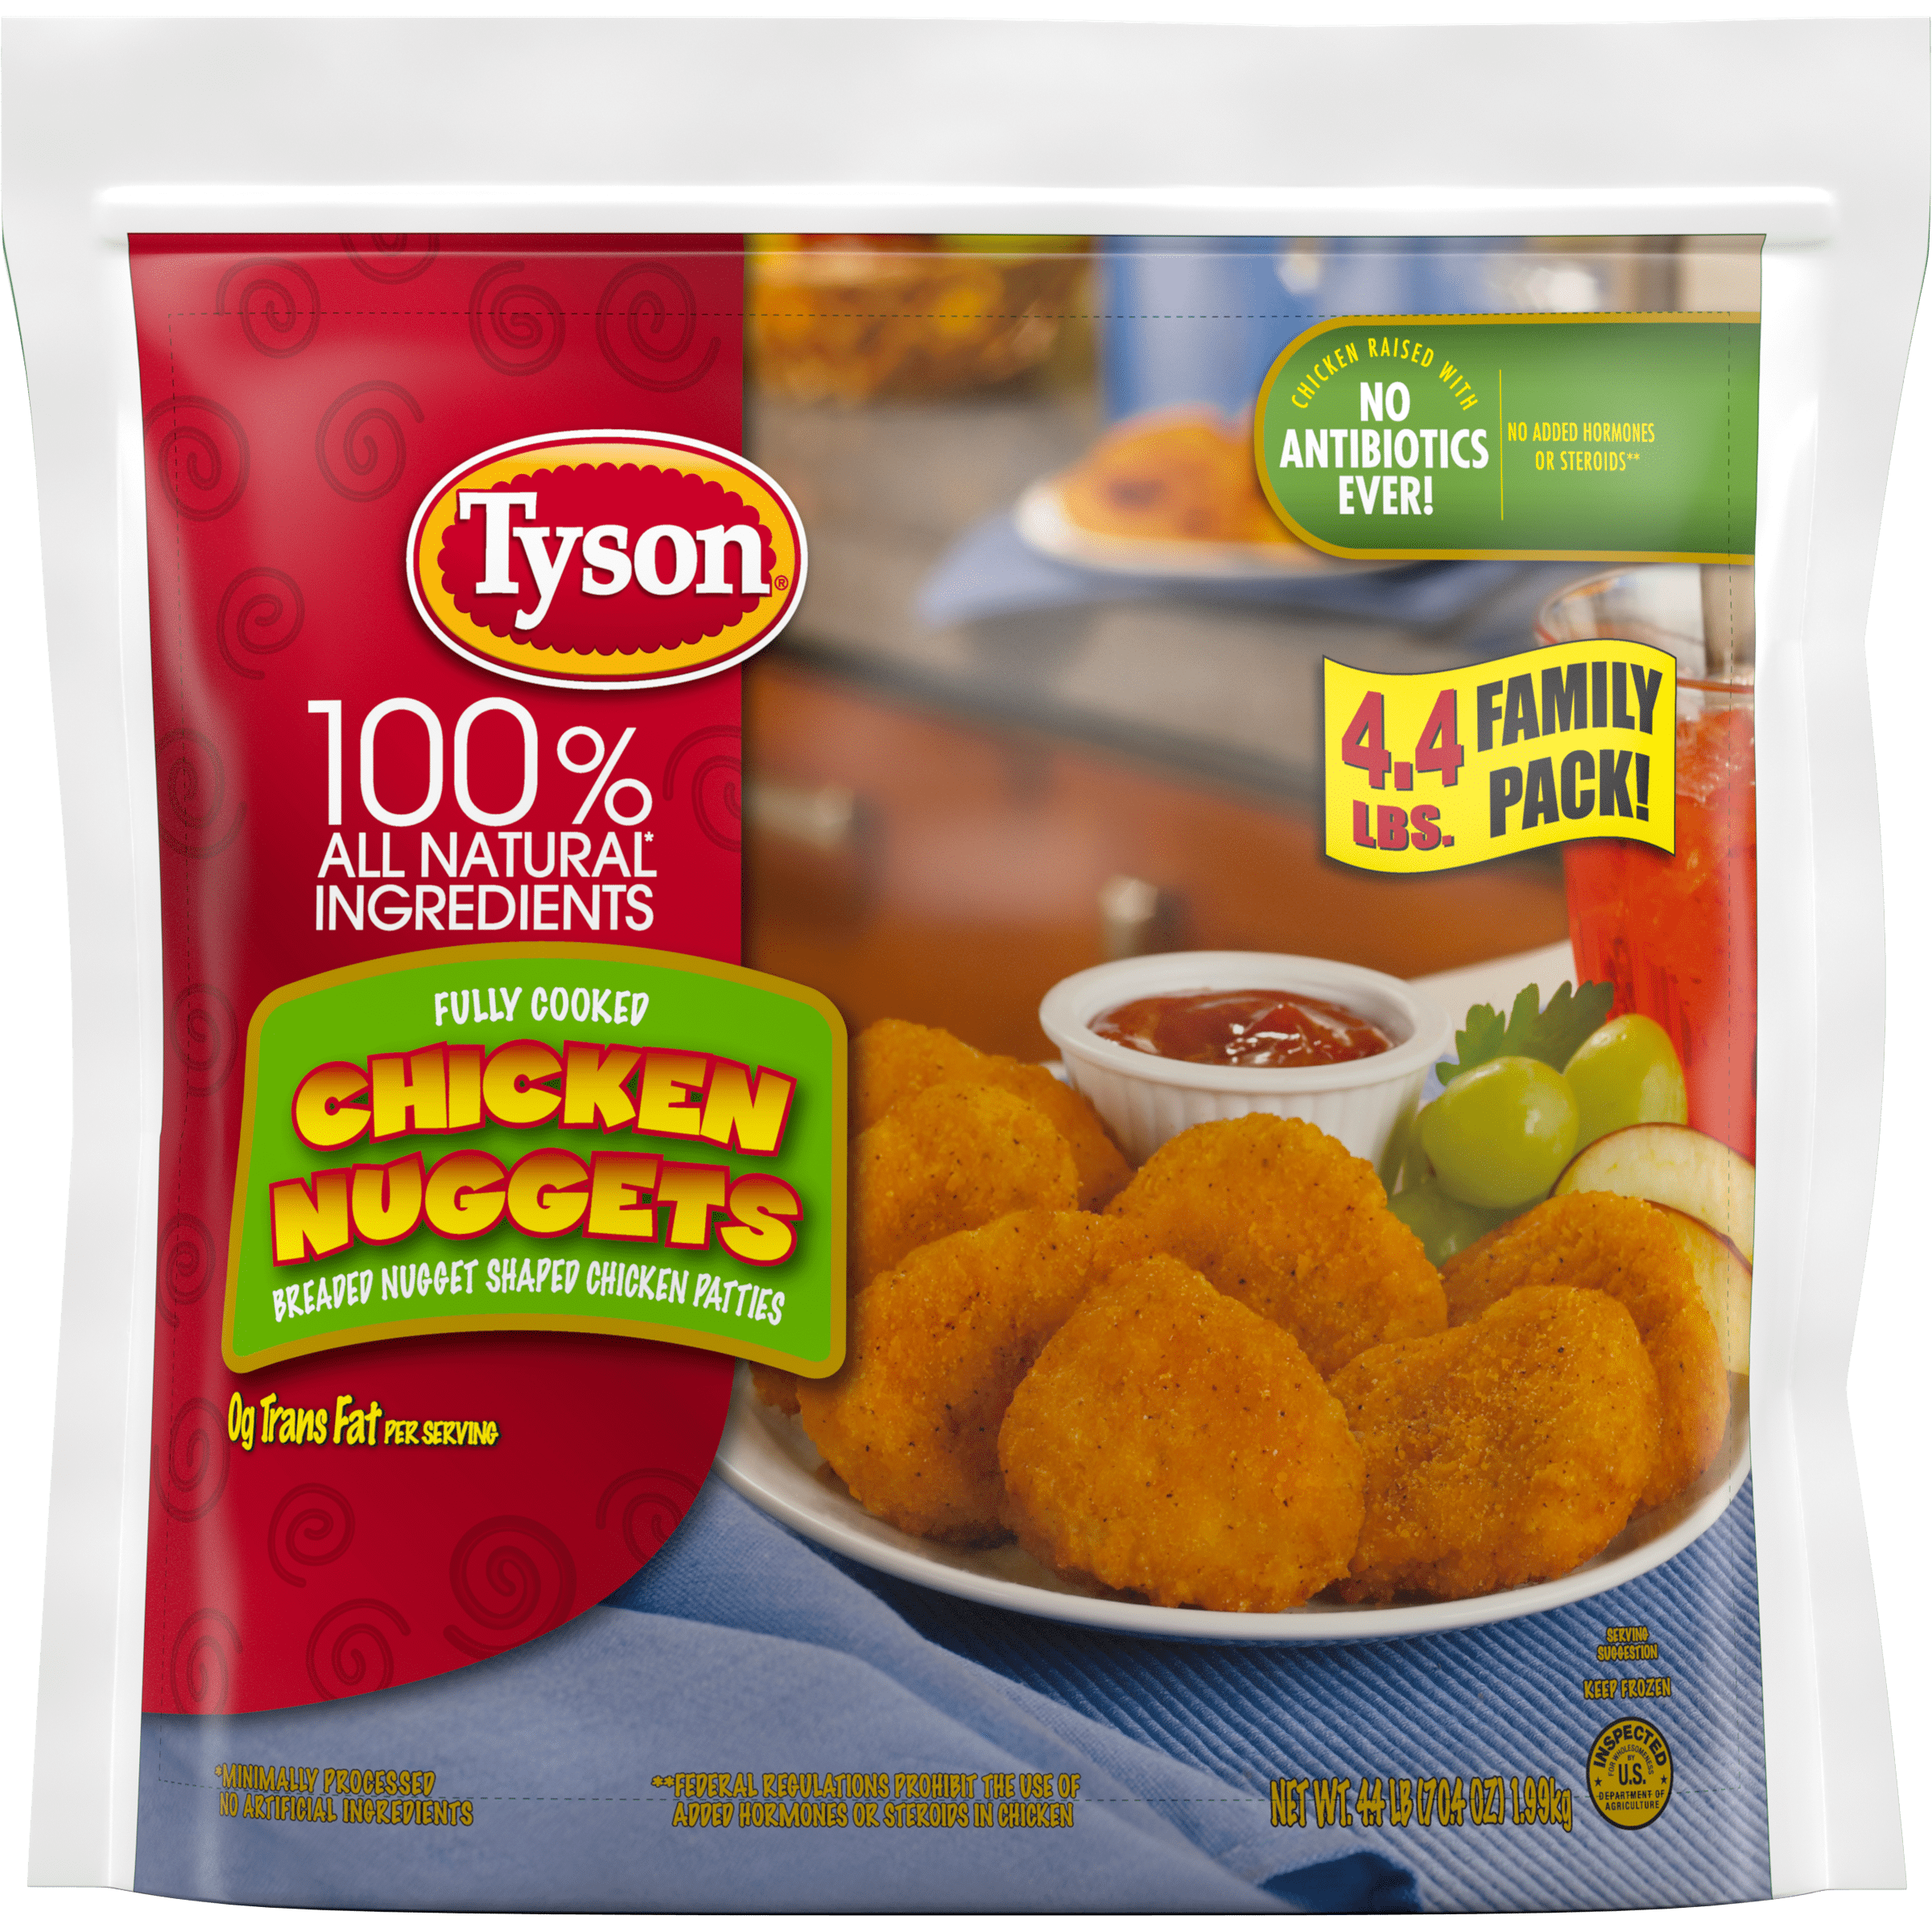 Tyson® Fully Cooked Chicken Nuggets, 4.4 lbs. (Frozen) - Walmart.com